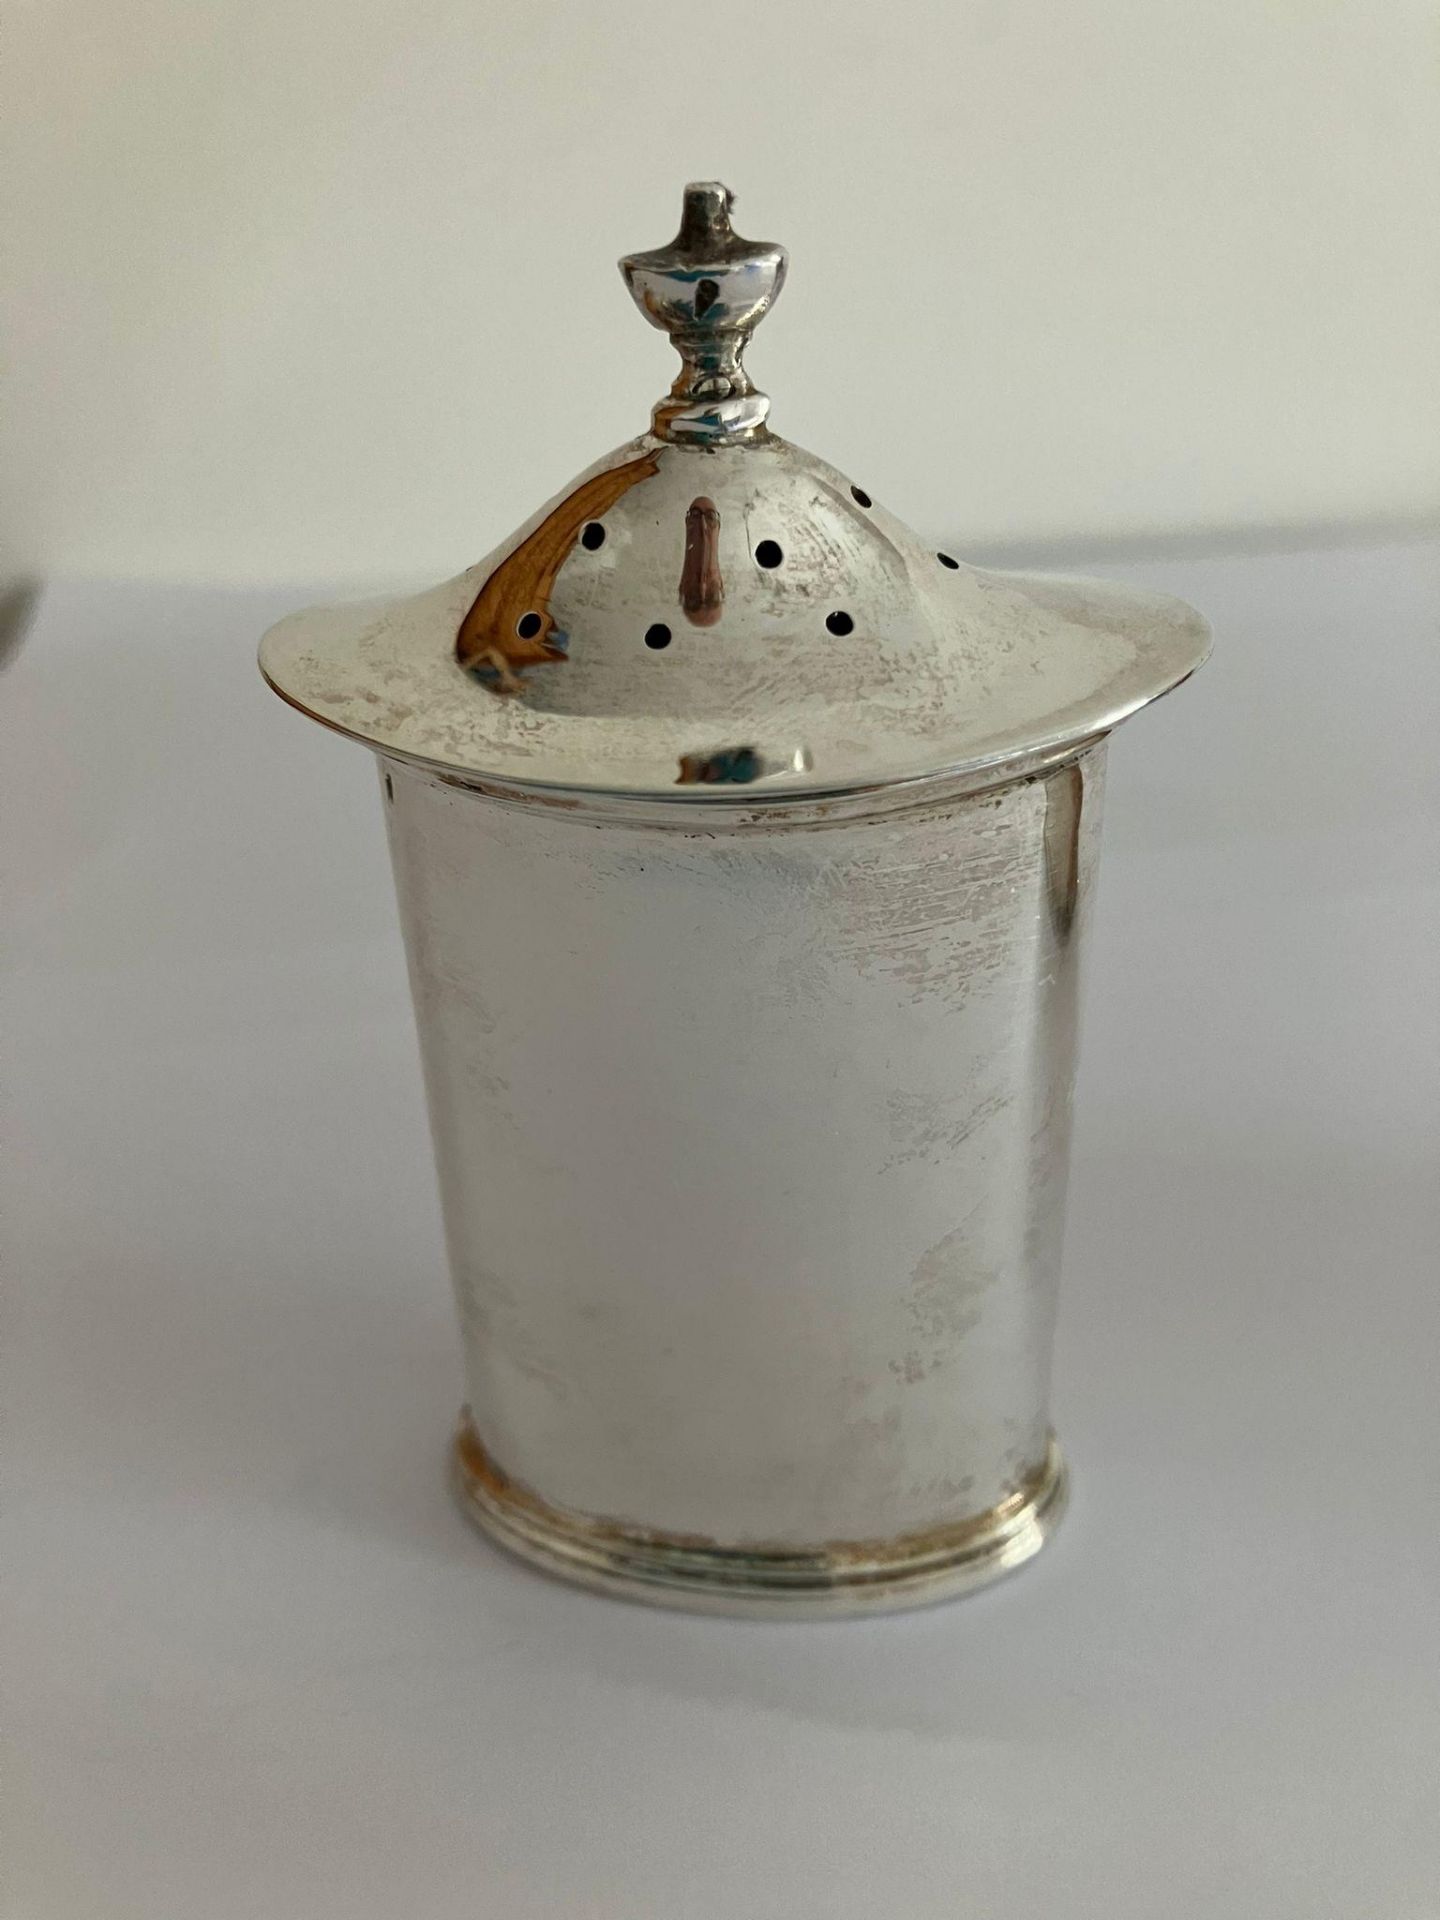 Solid SILVER PEPPER and MUSTARD POT SET. Hallmark for J B. Chatterley and Sons of Birmingham. High